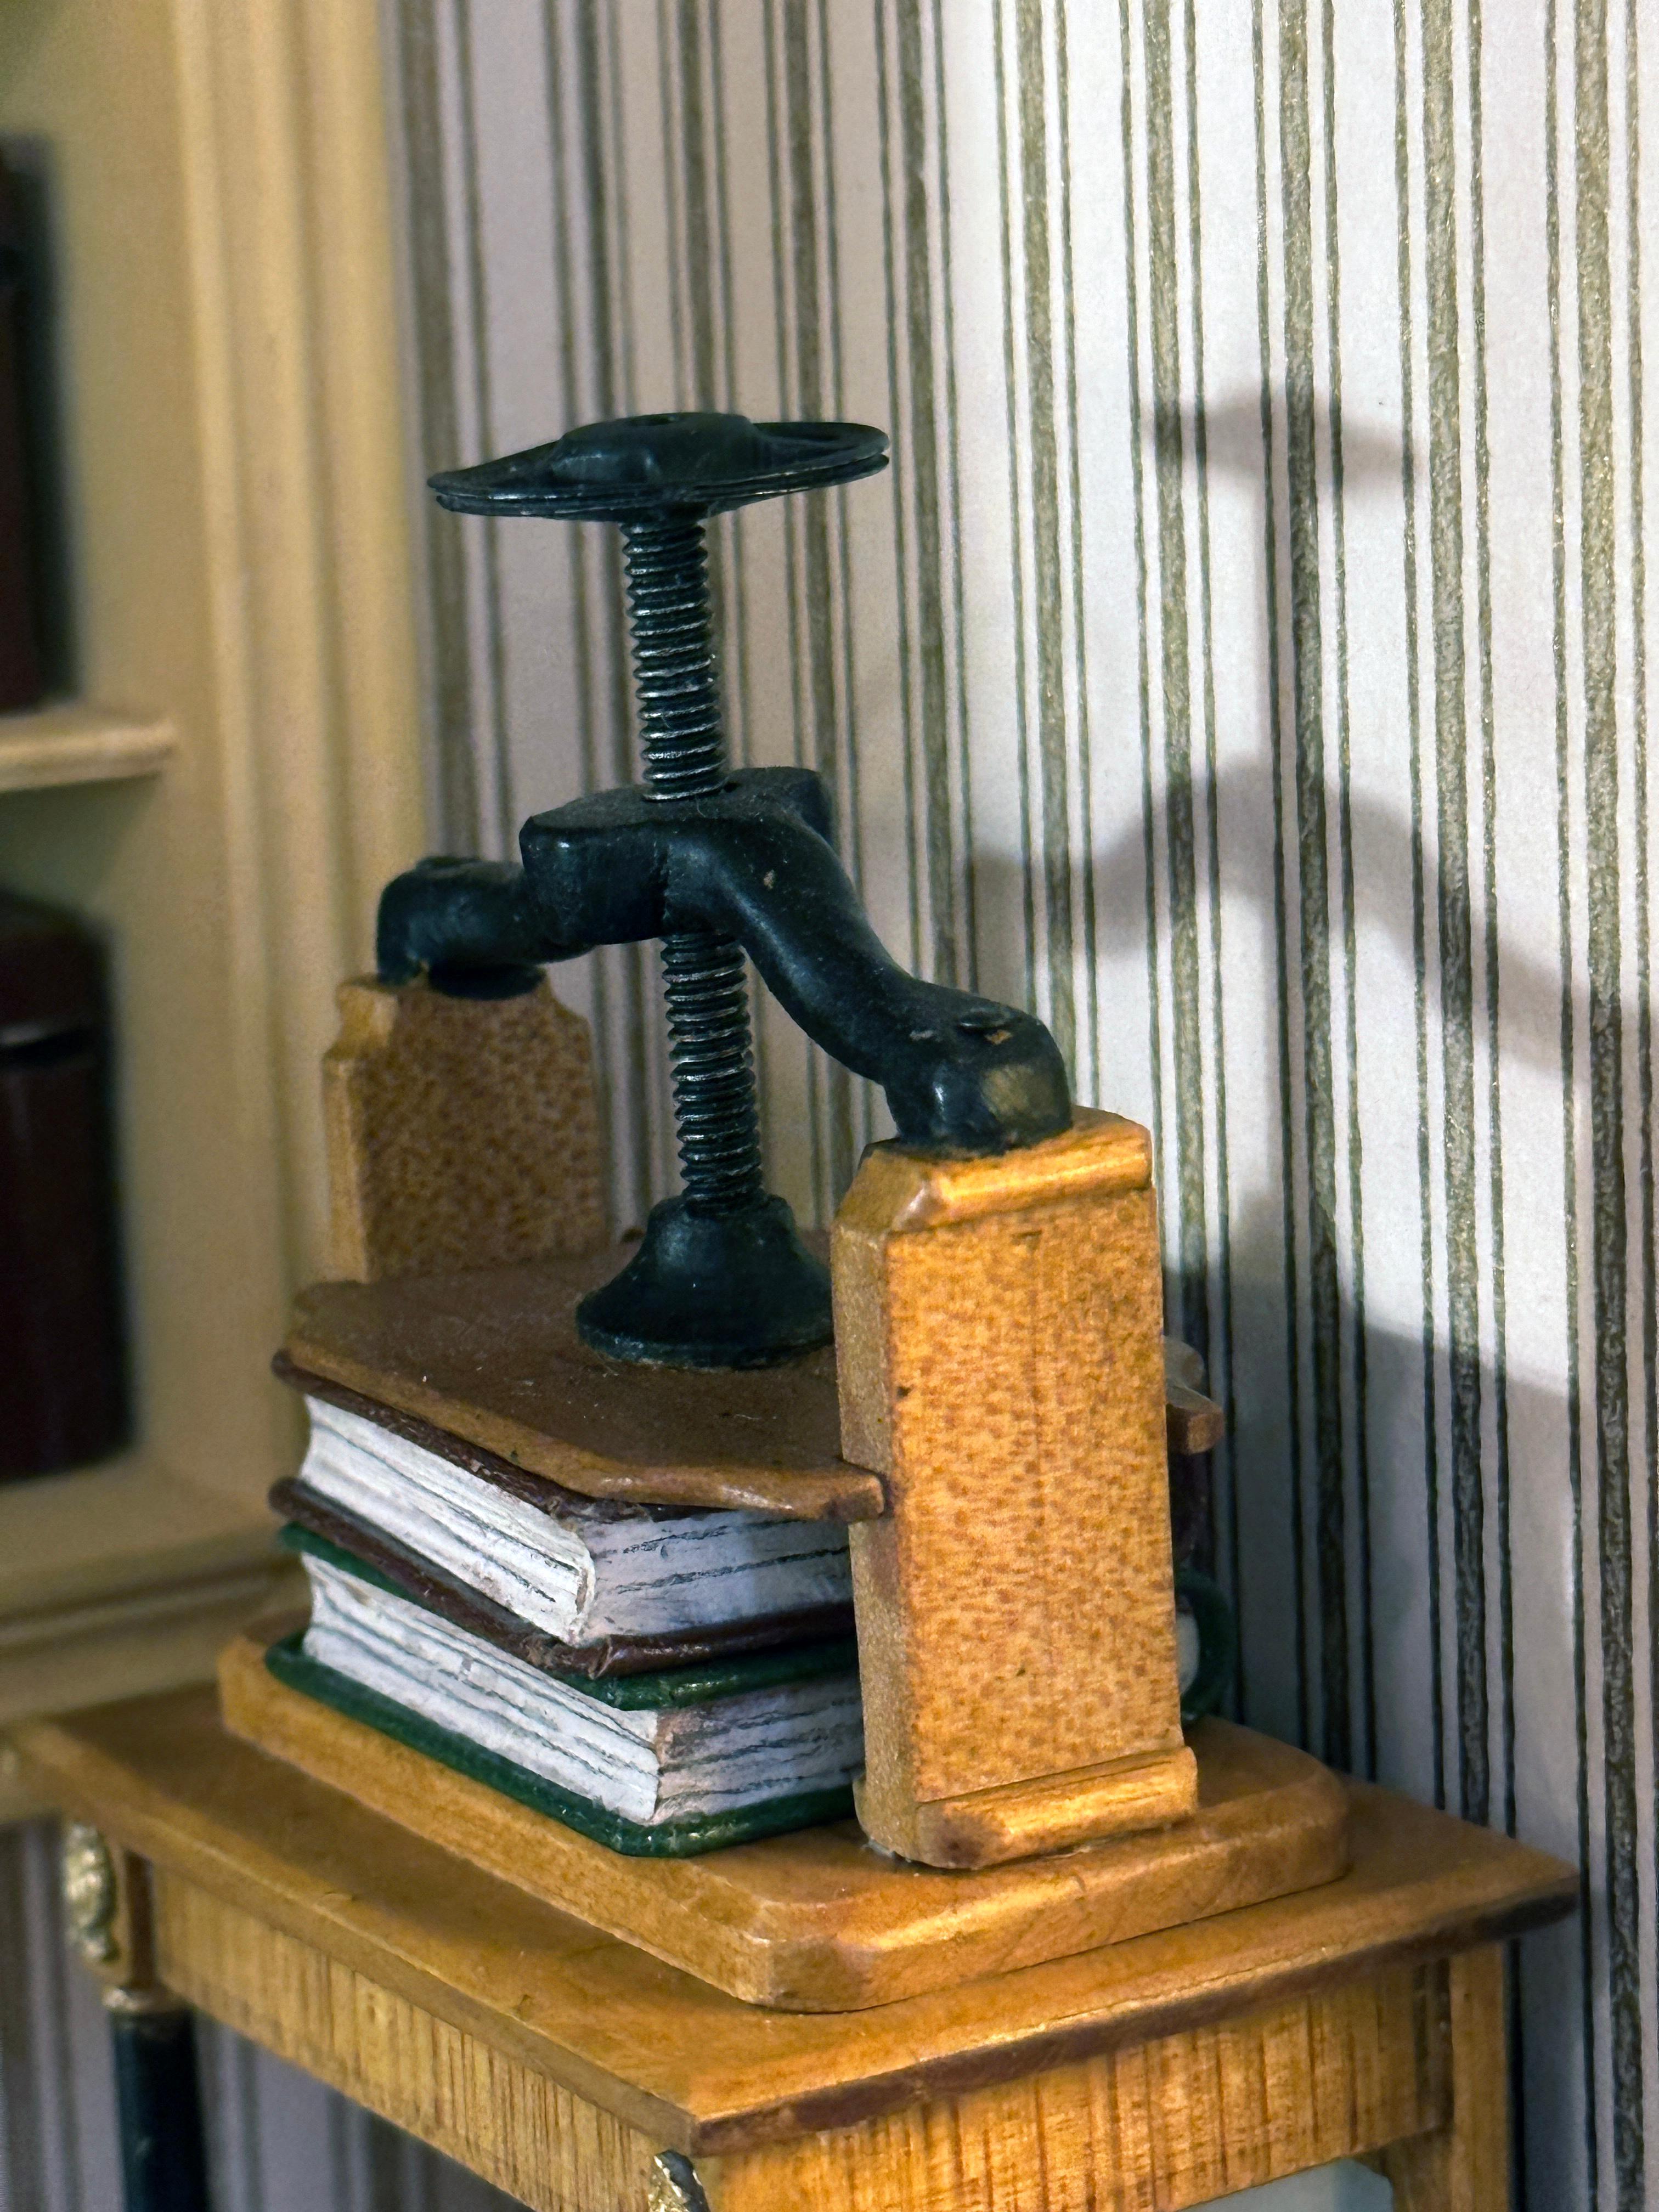 Lawyer's Office Circa 1835 - Kupjack Studios Miniature Room - Contemporary Sculpture by Henry 